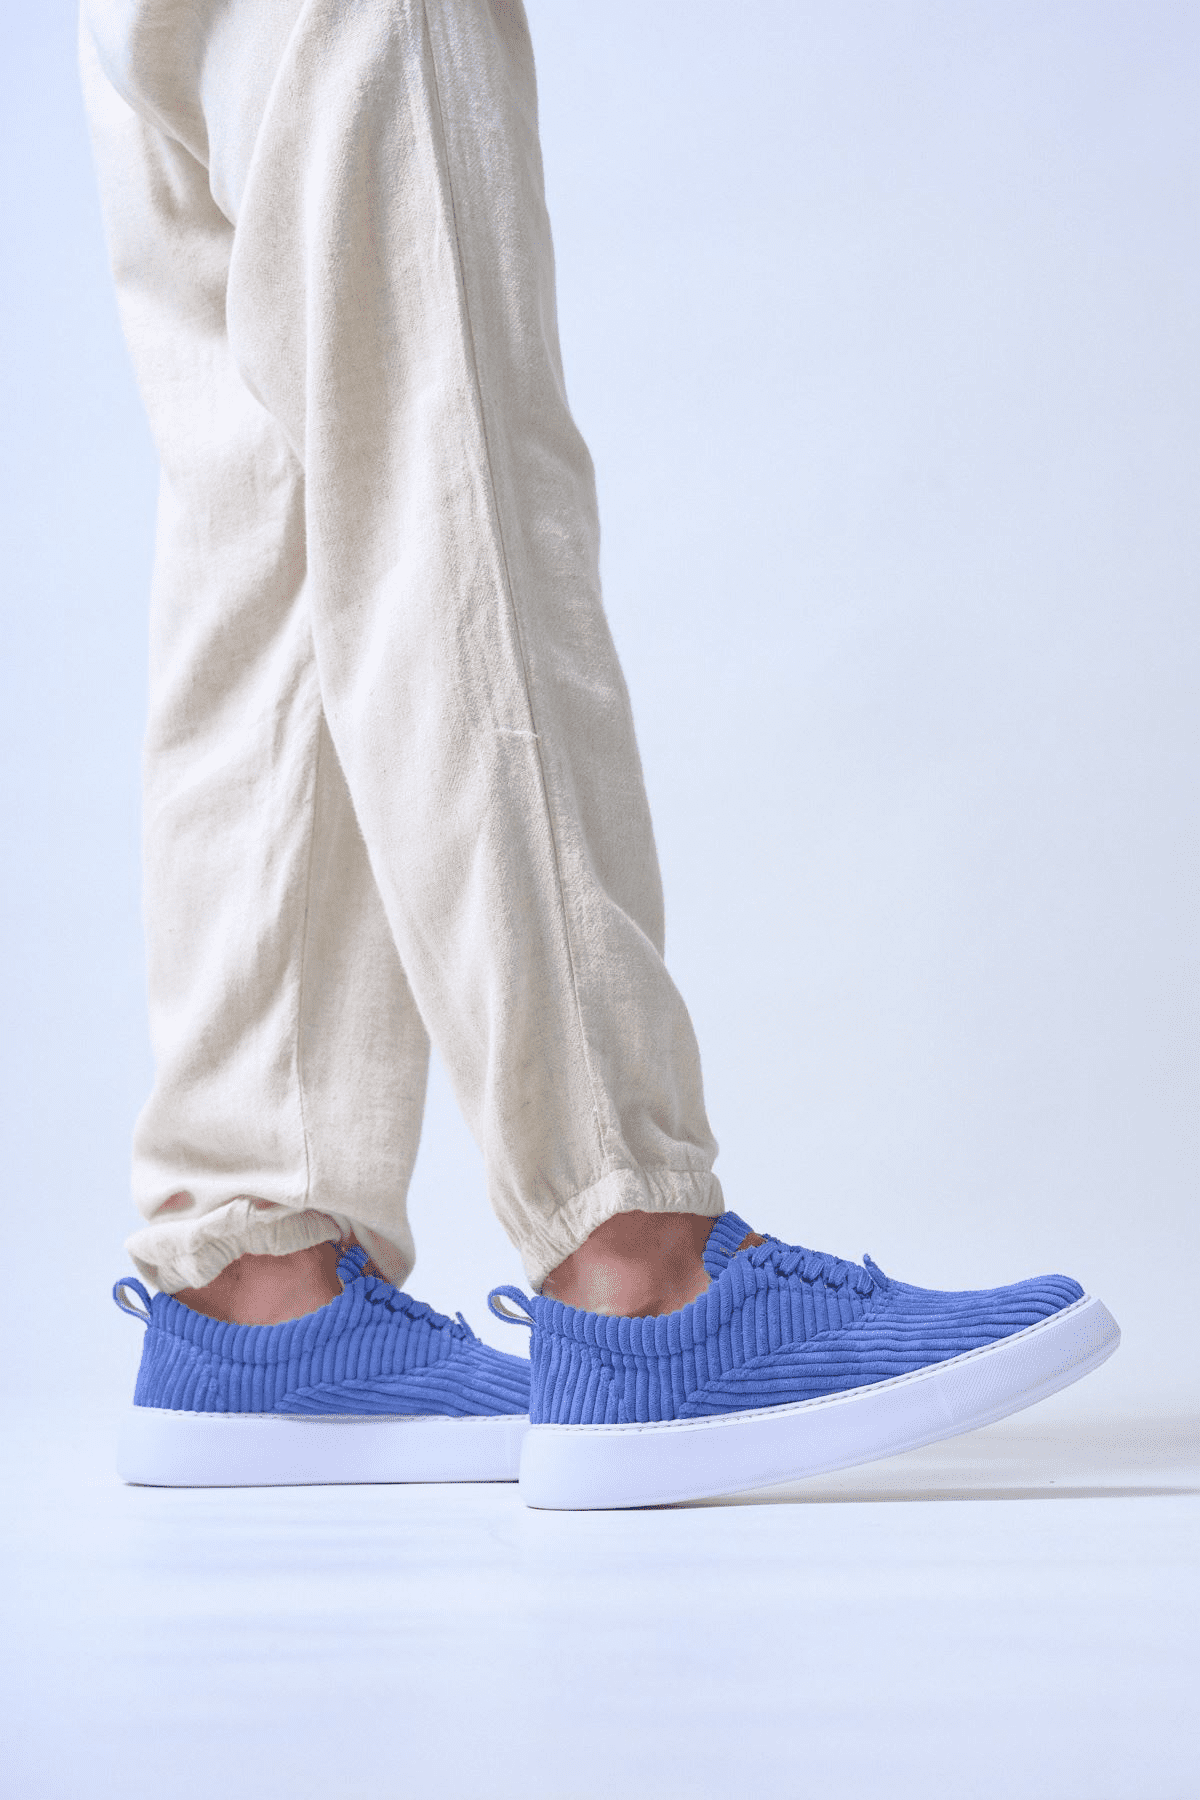 Chekich Men's Shoes Blue Color Lace-up Closure Knitting Fabric Material Quality High White Sole Flexible Casual Sports CH173